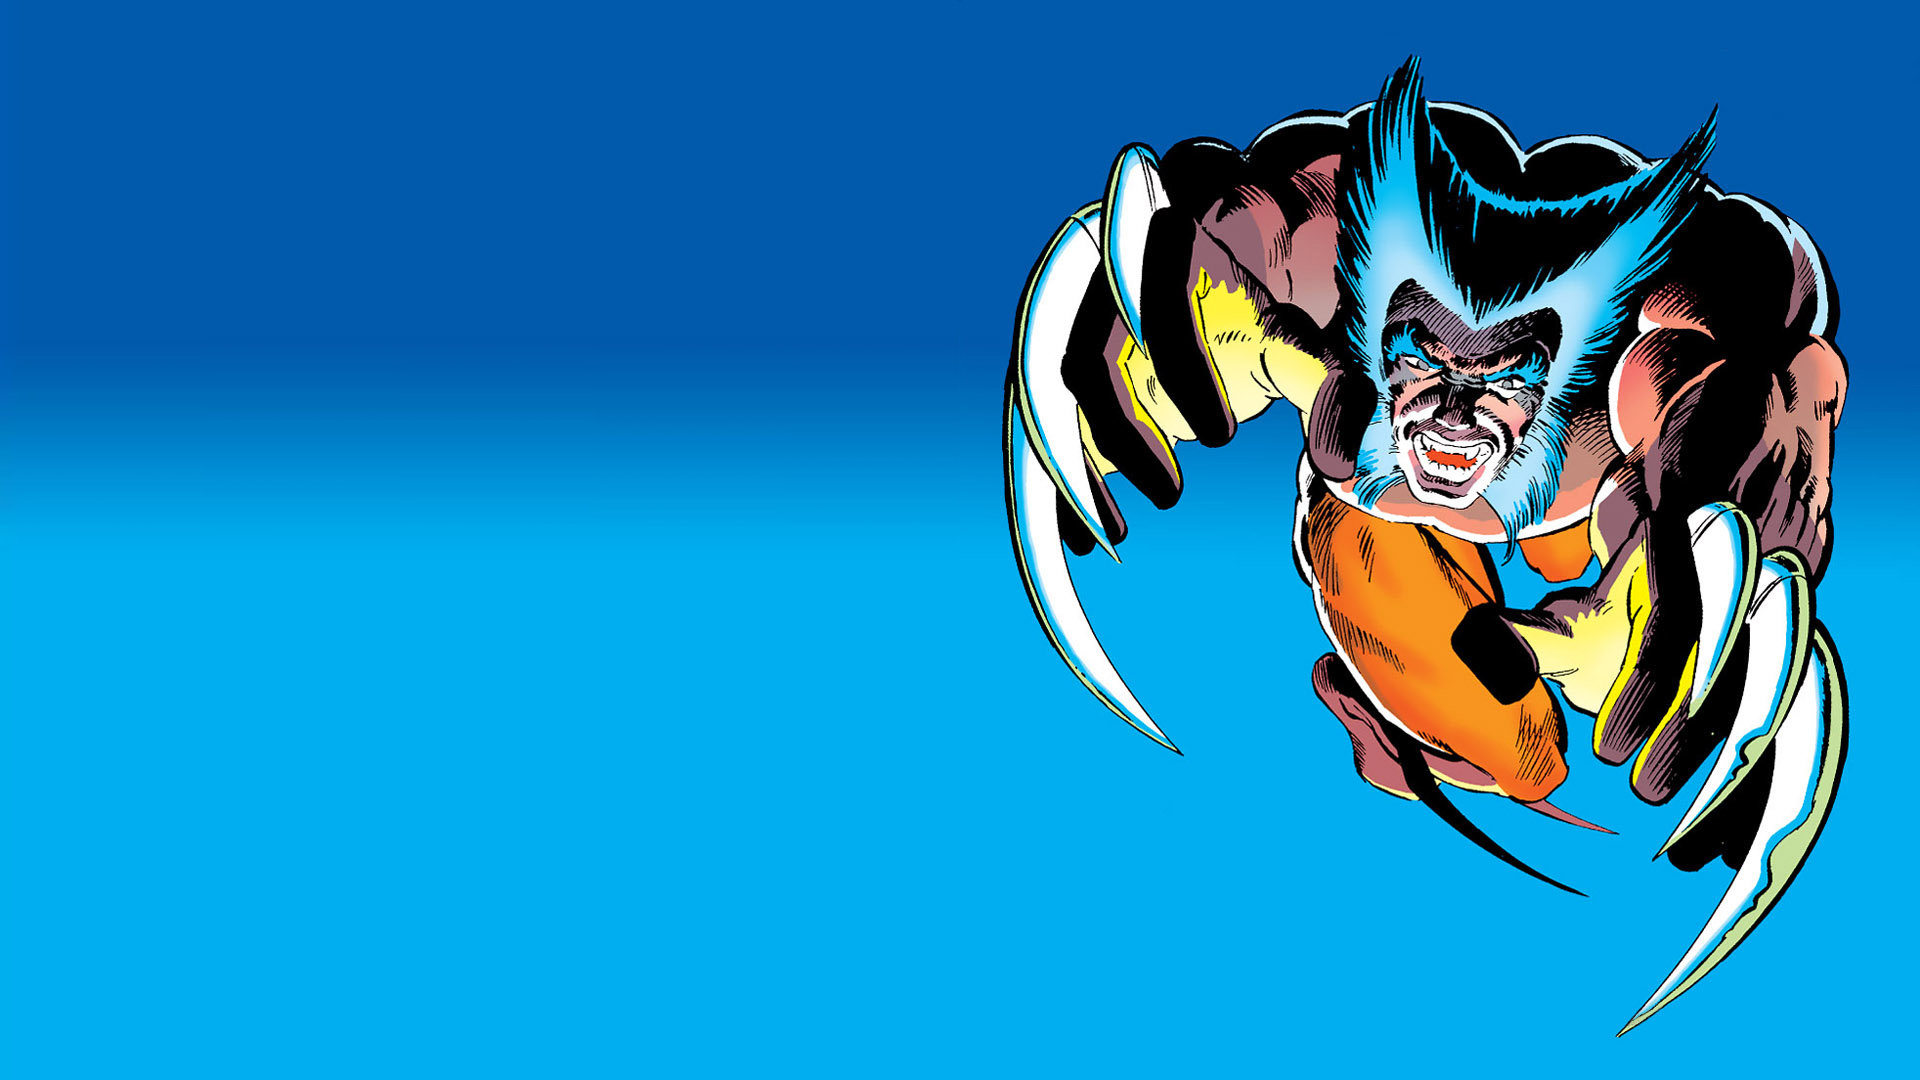 Download hd 1920x1080 Superhero PC background ID:276550 for free